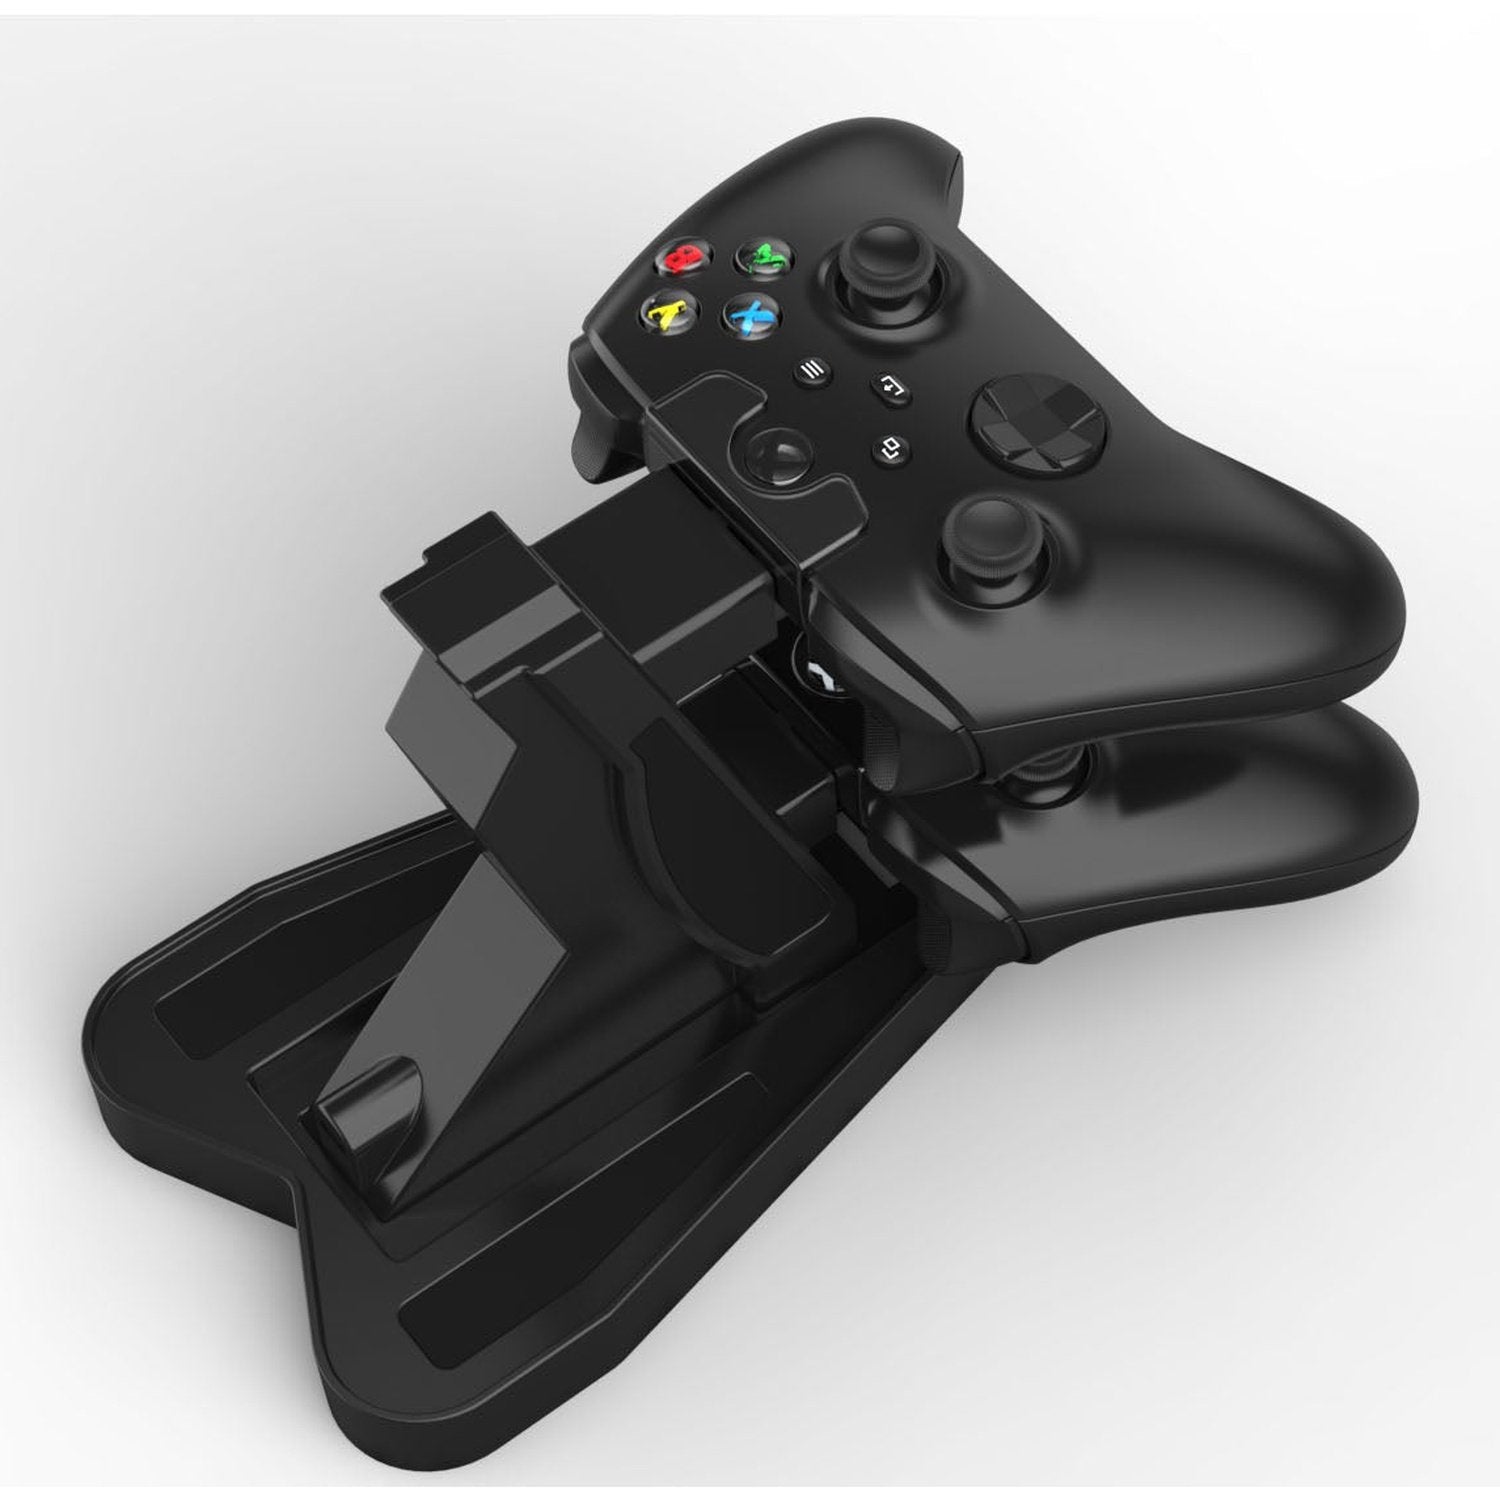 Controller Charger Stand compatible with Xbox Series X | S Controllers | Charging Dock Station with LED Lights